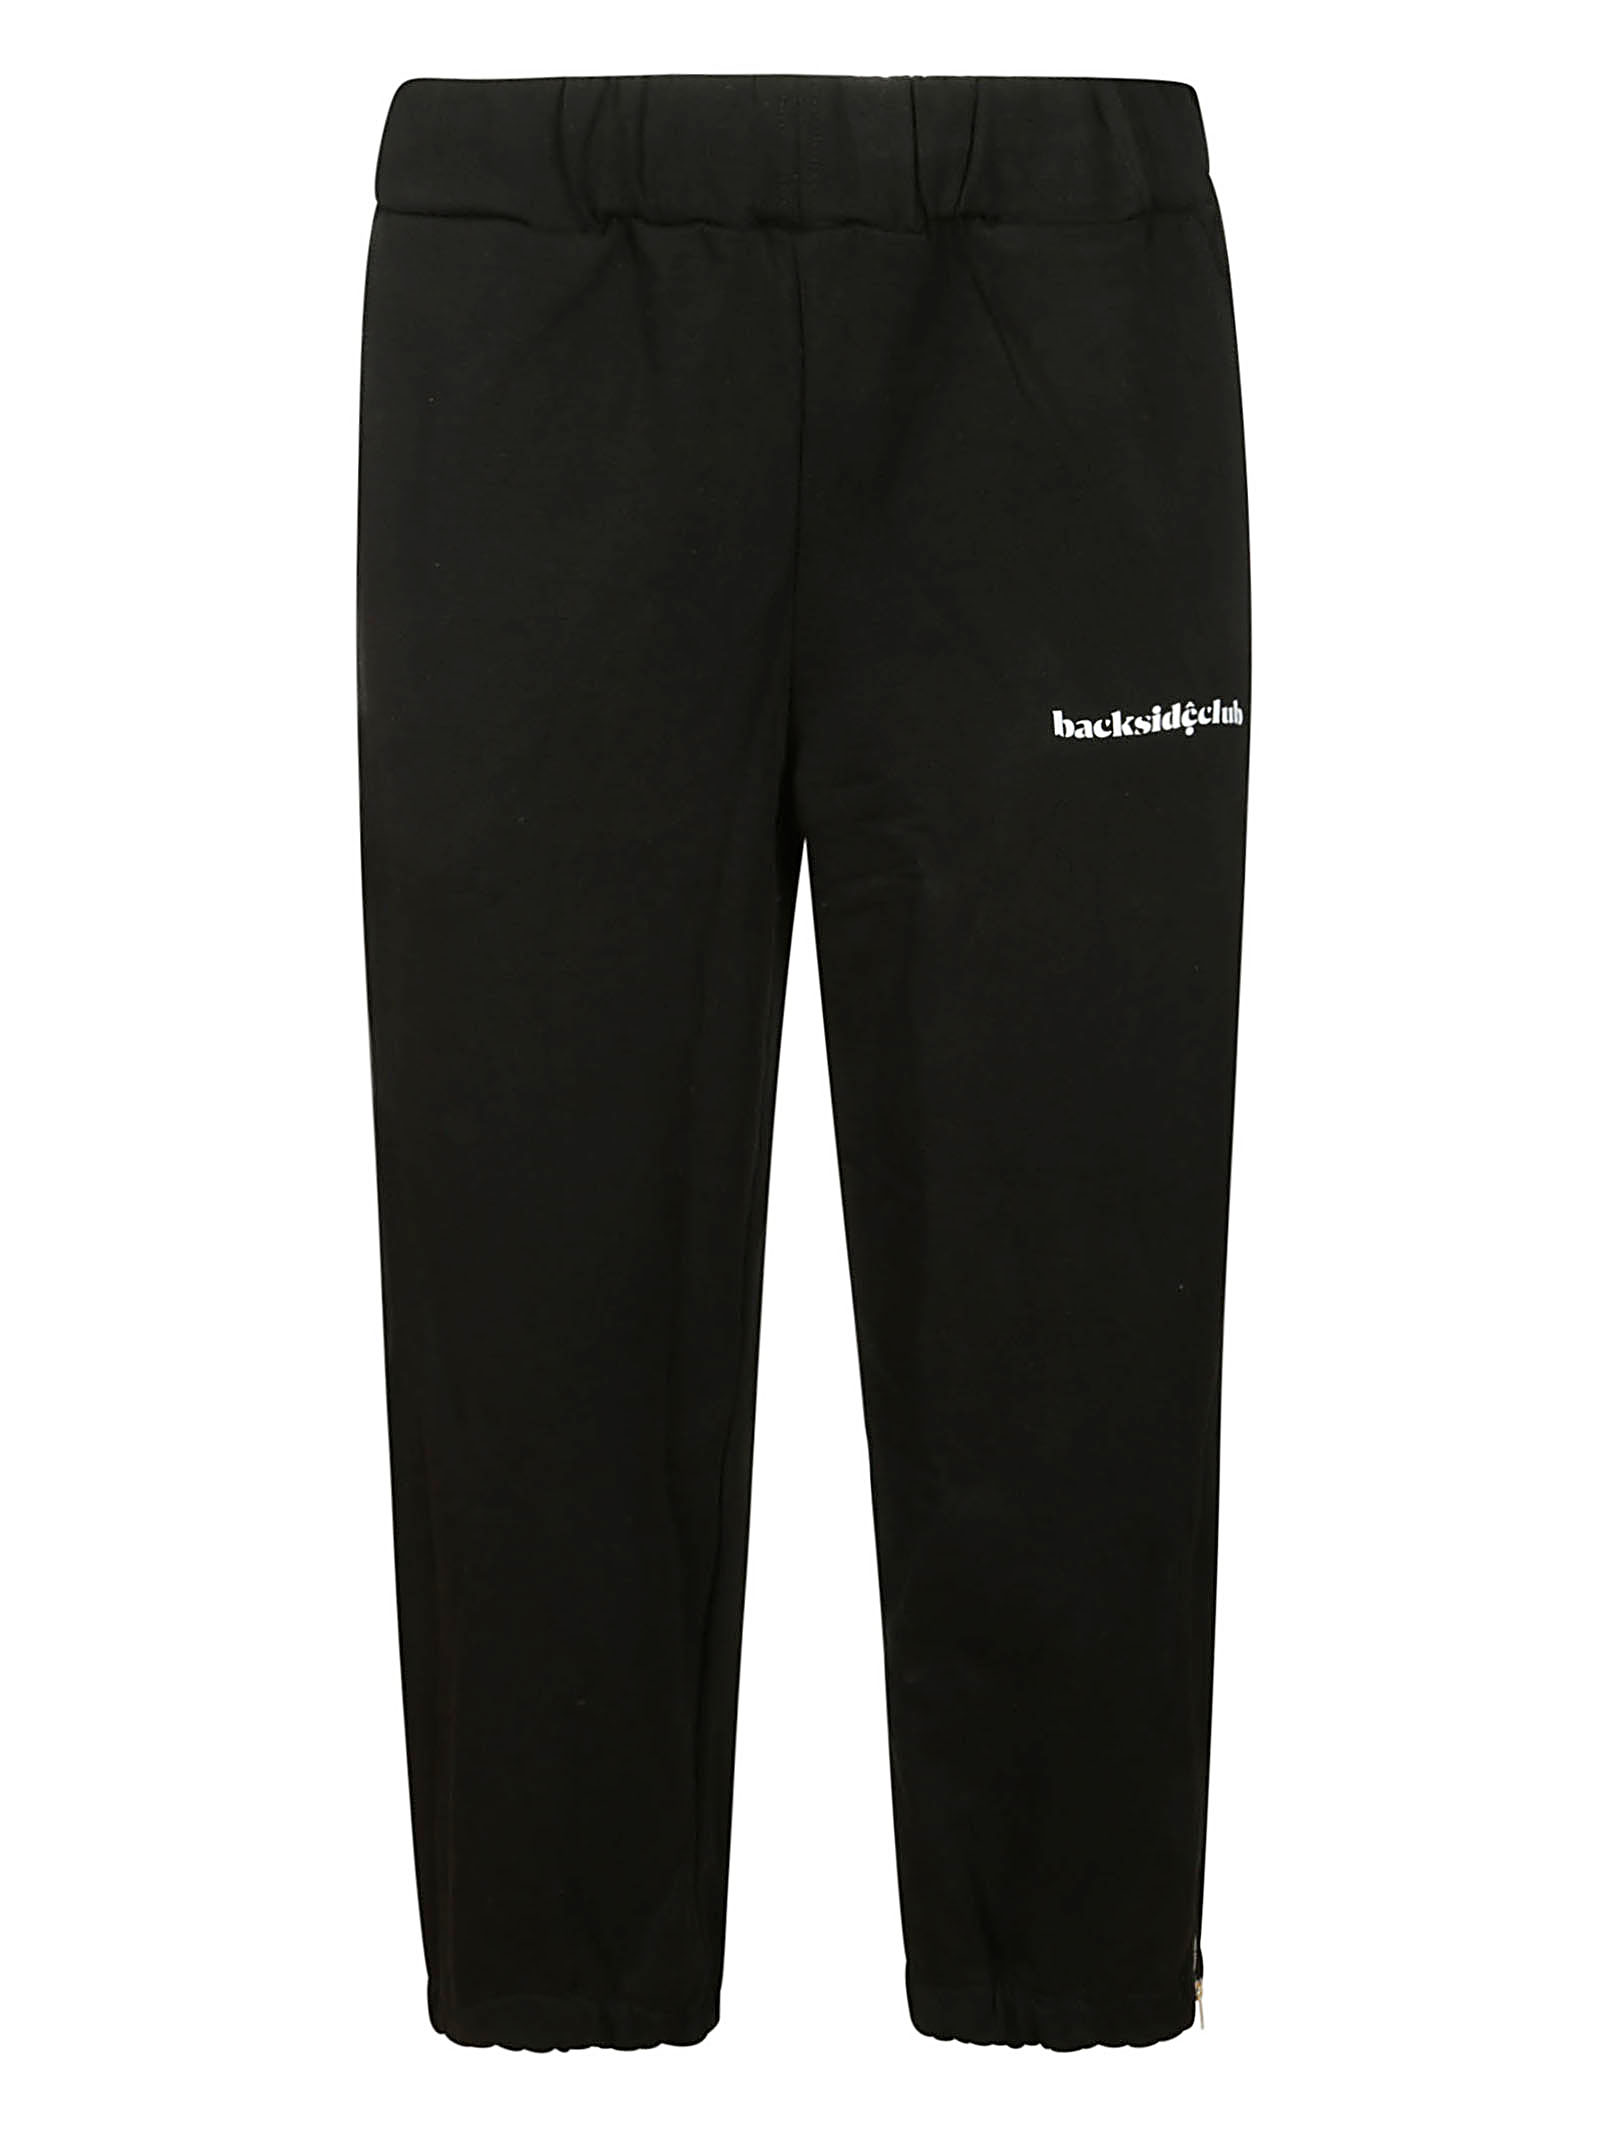 Picture of Backsideclub | Sweatpant